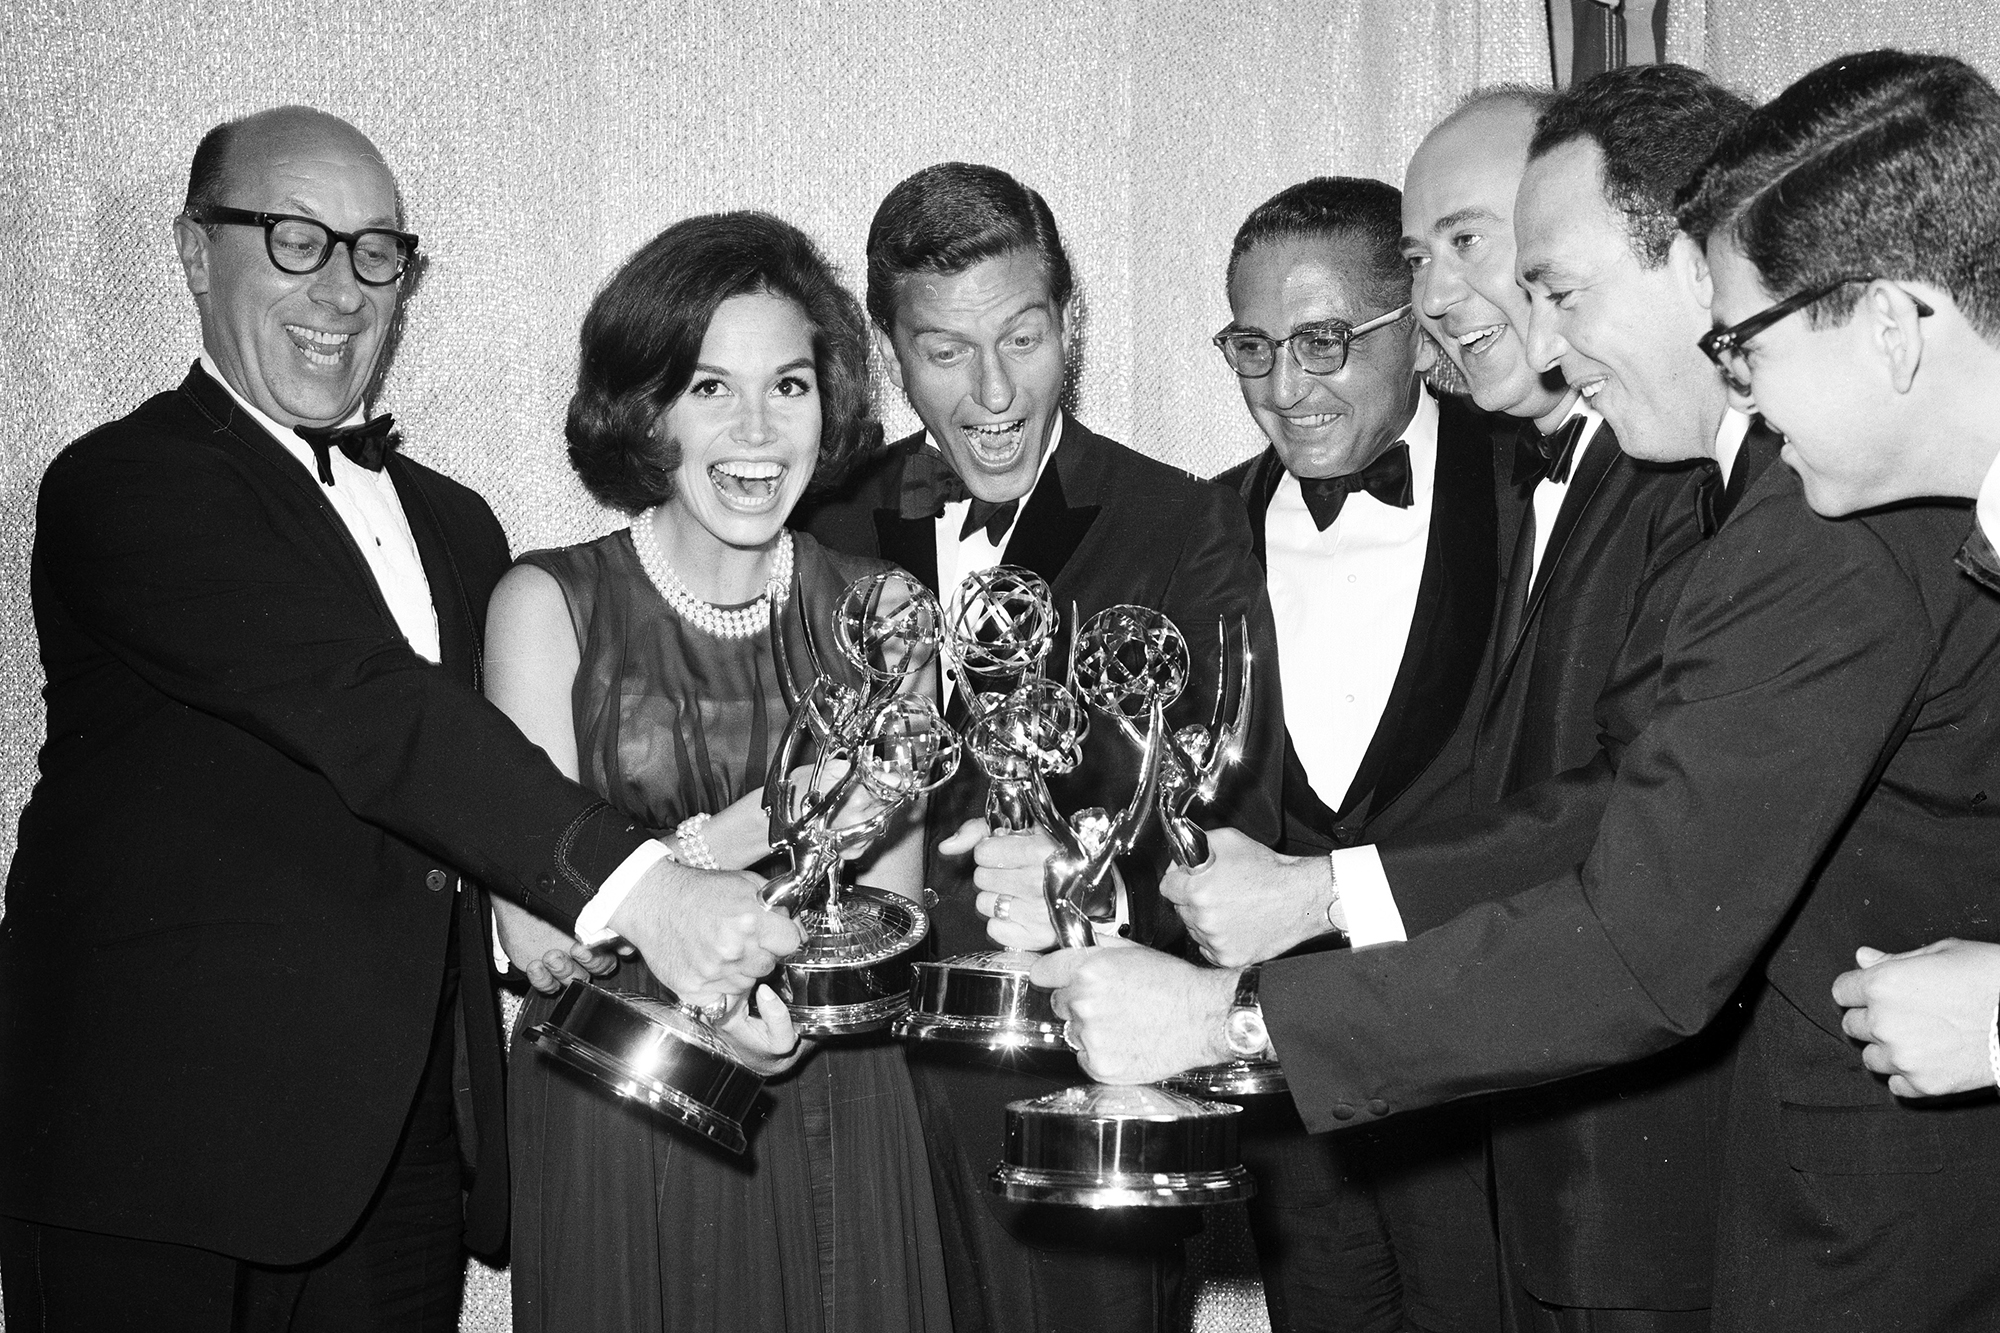 Mary Tyler Moore poses with co-stars of The Dick Van Dyke Show after receiving Emmy Awards c. 1962 in Los Angeles.